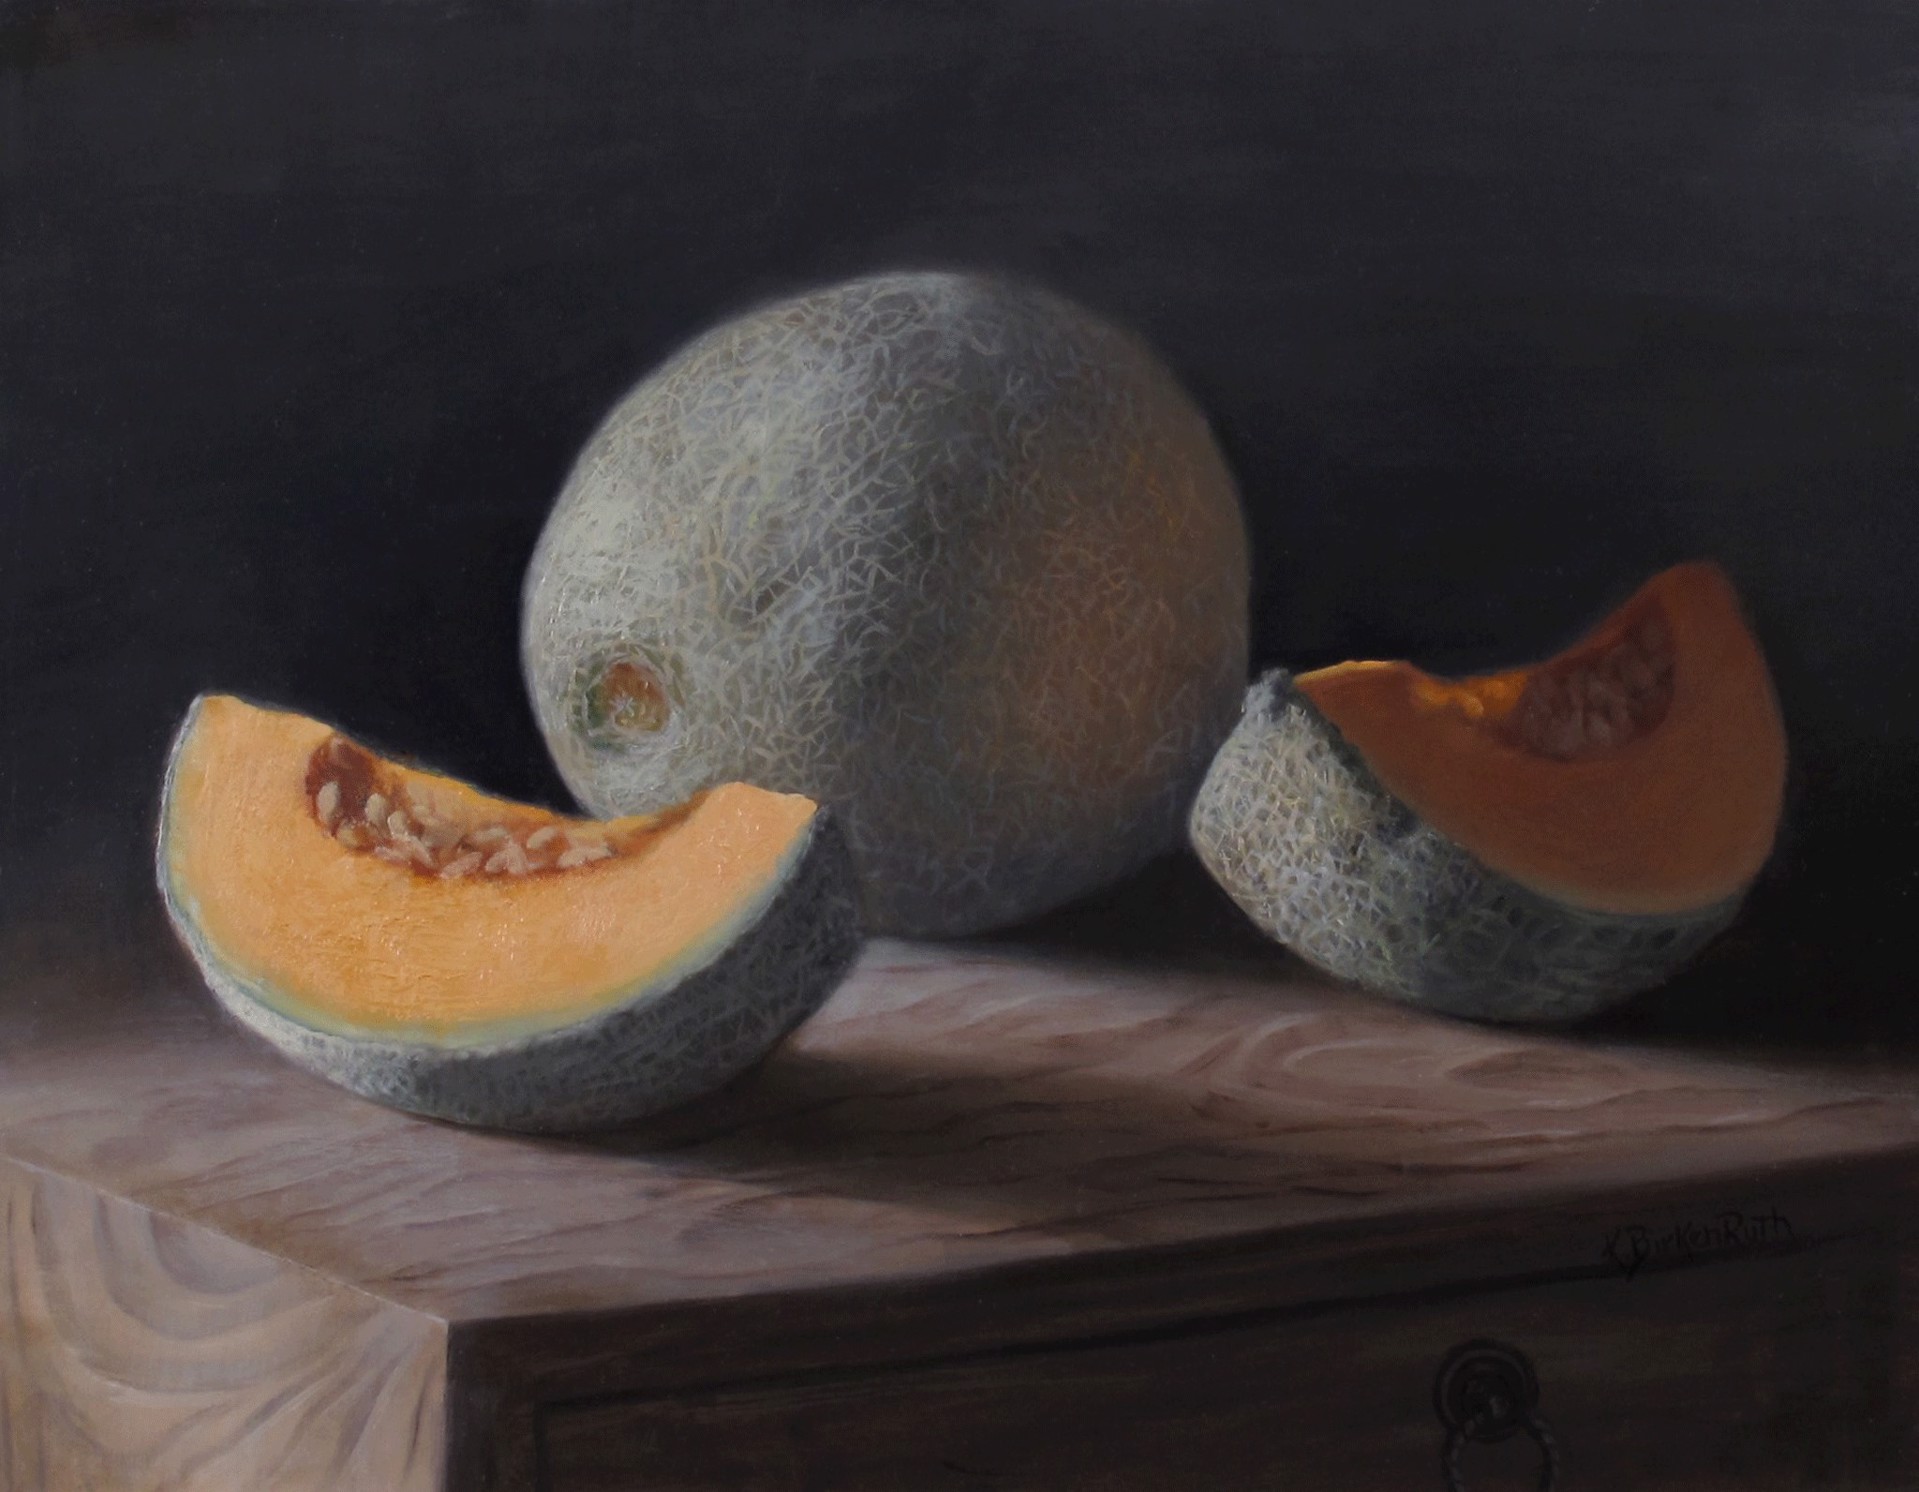 Melons by Kelly Birkenruth